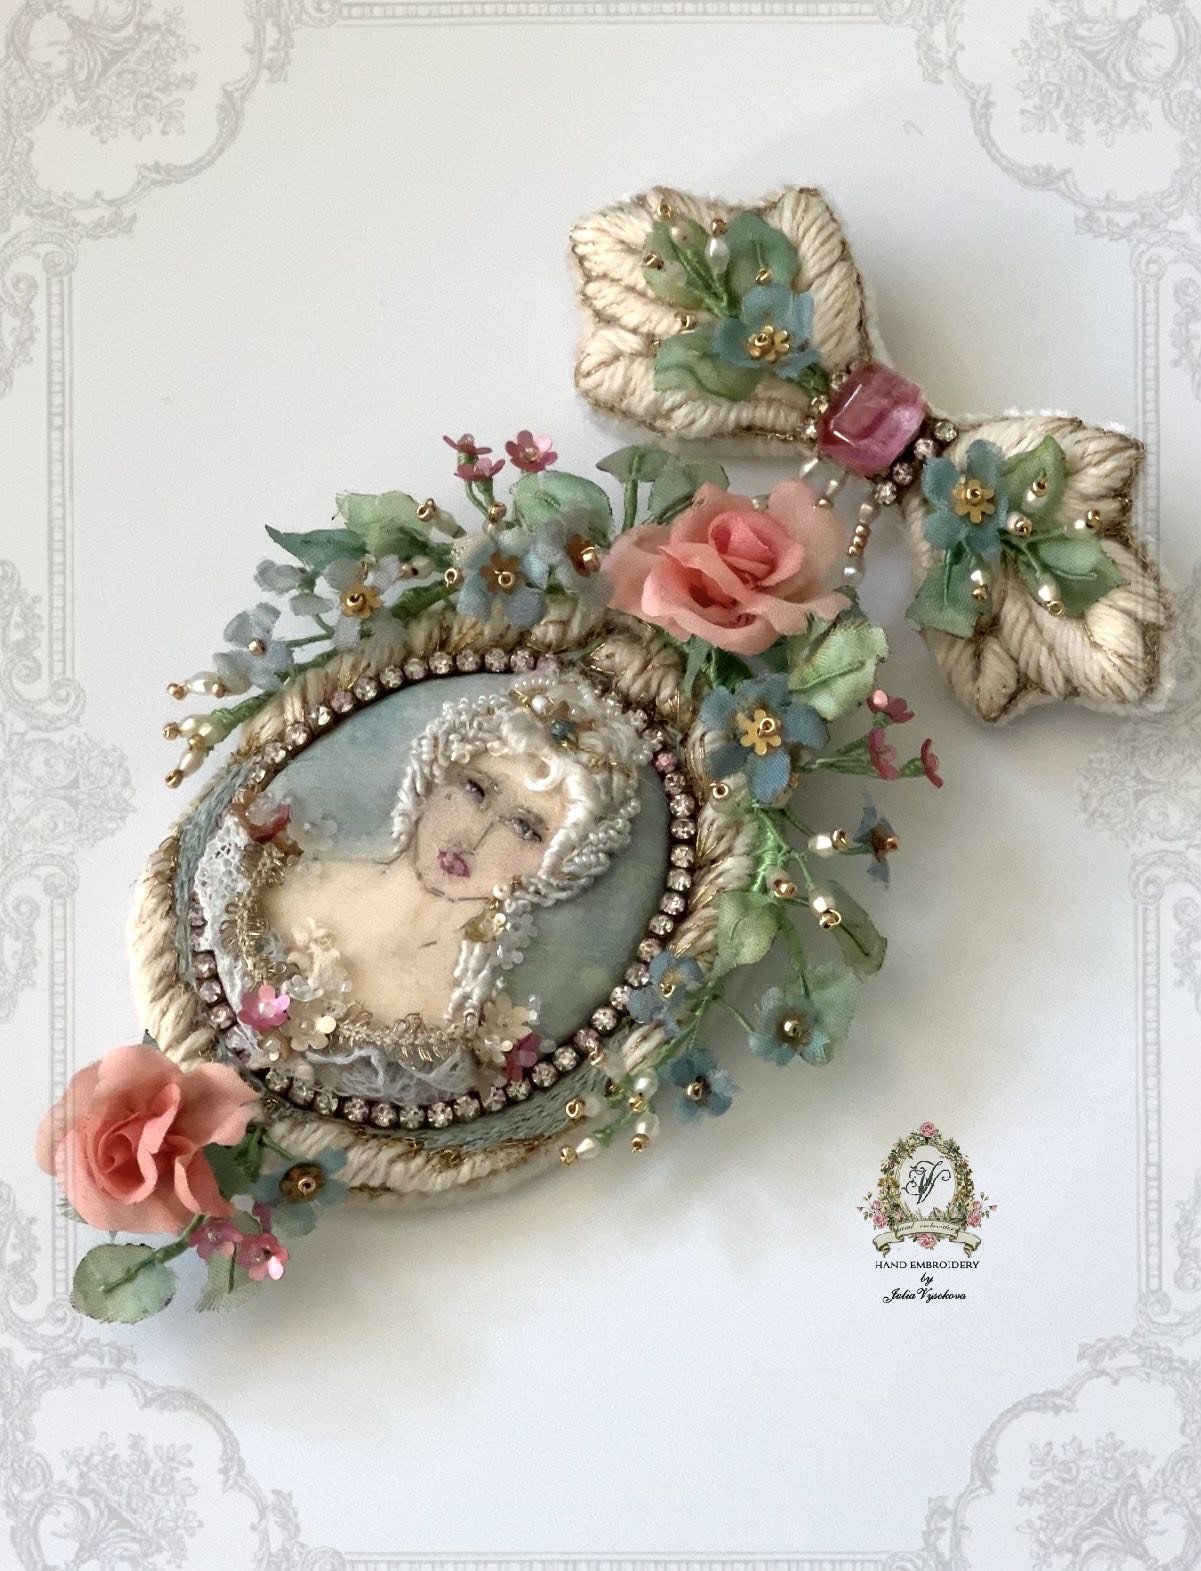 Embroidered Brooch "Marquise"